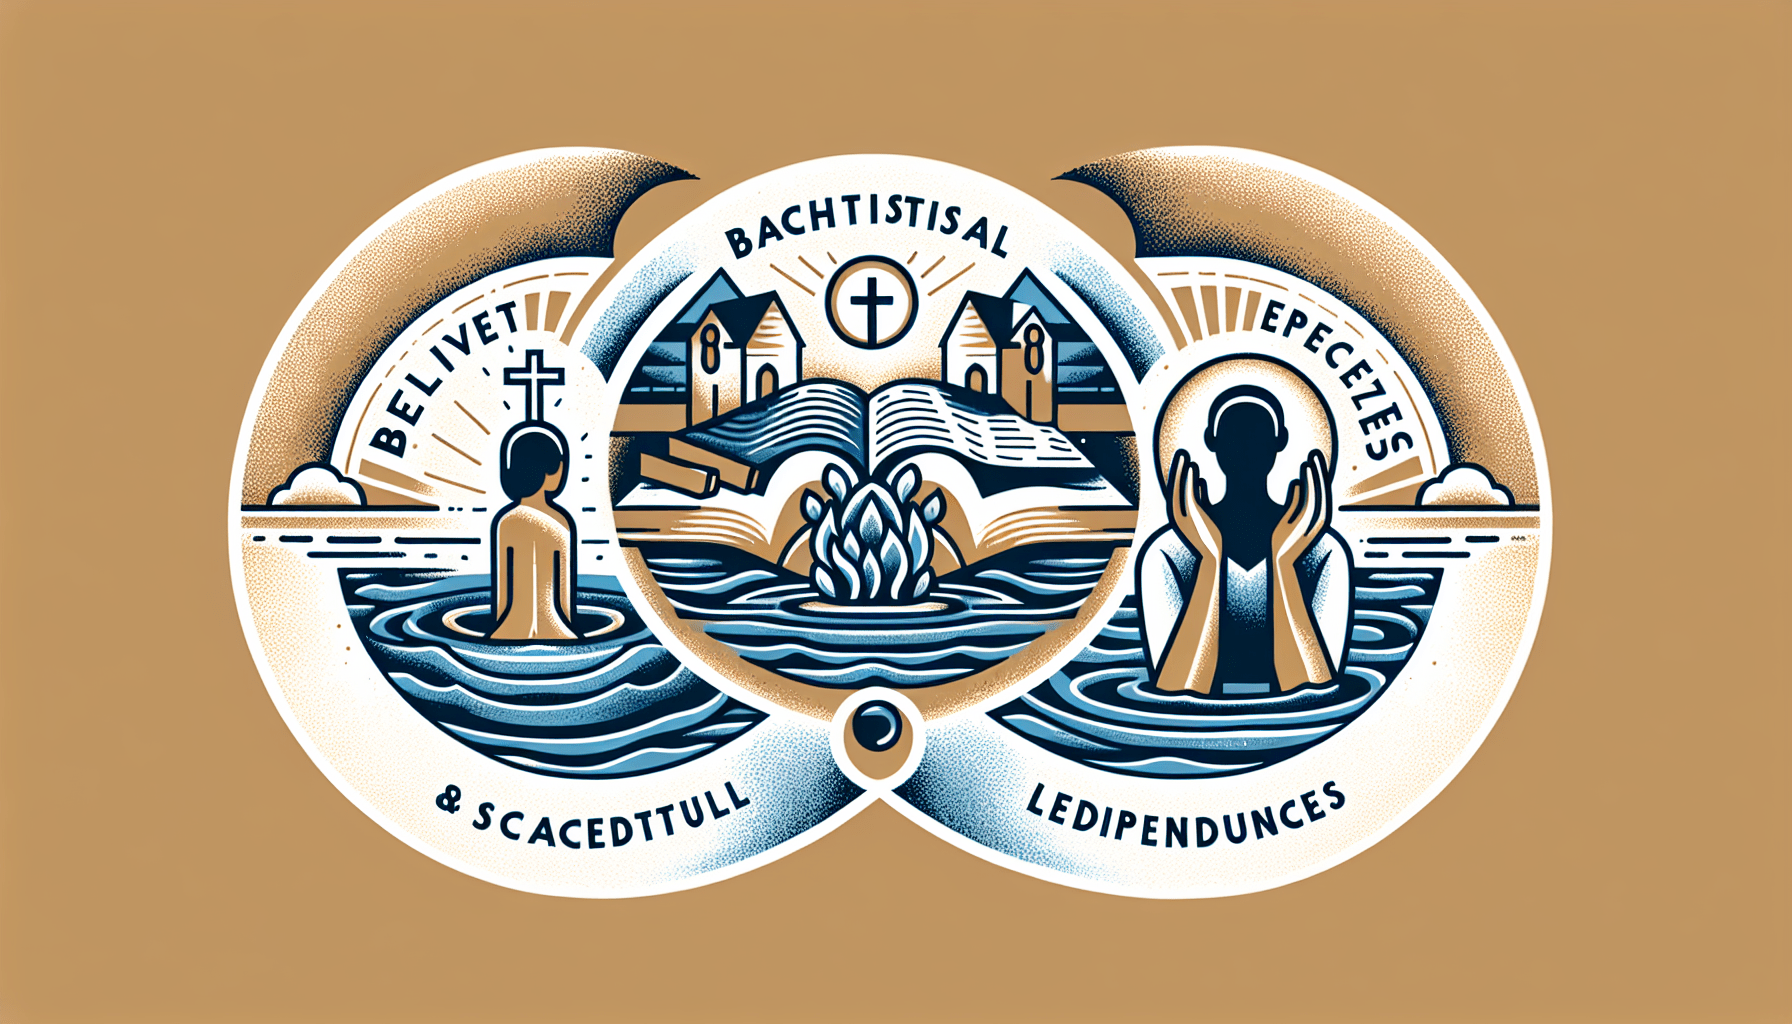 What Are The Three Main Beliefs Of Baptists?